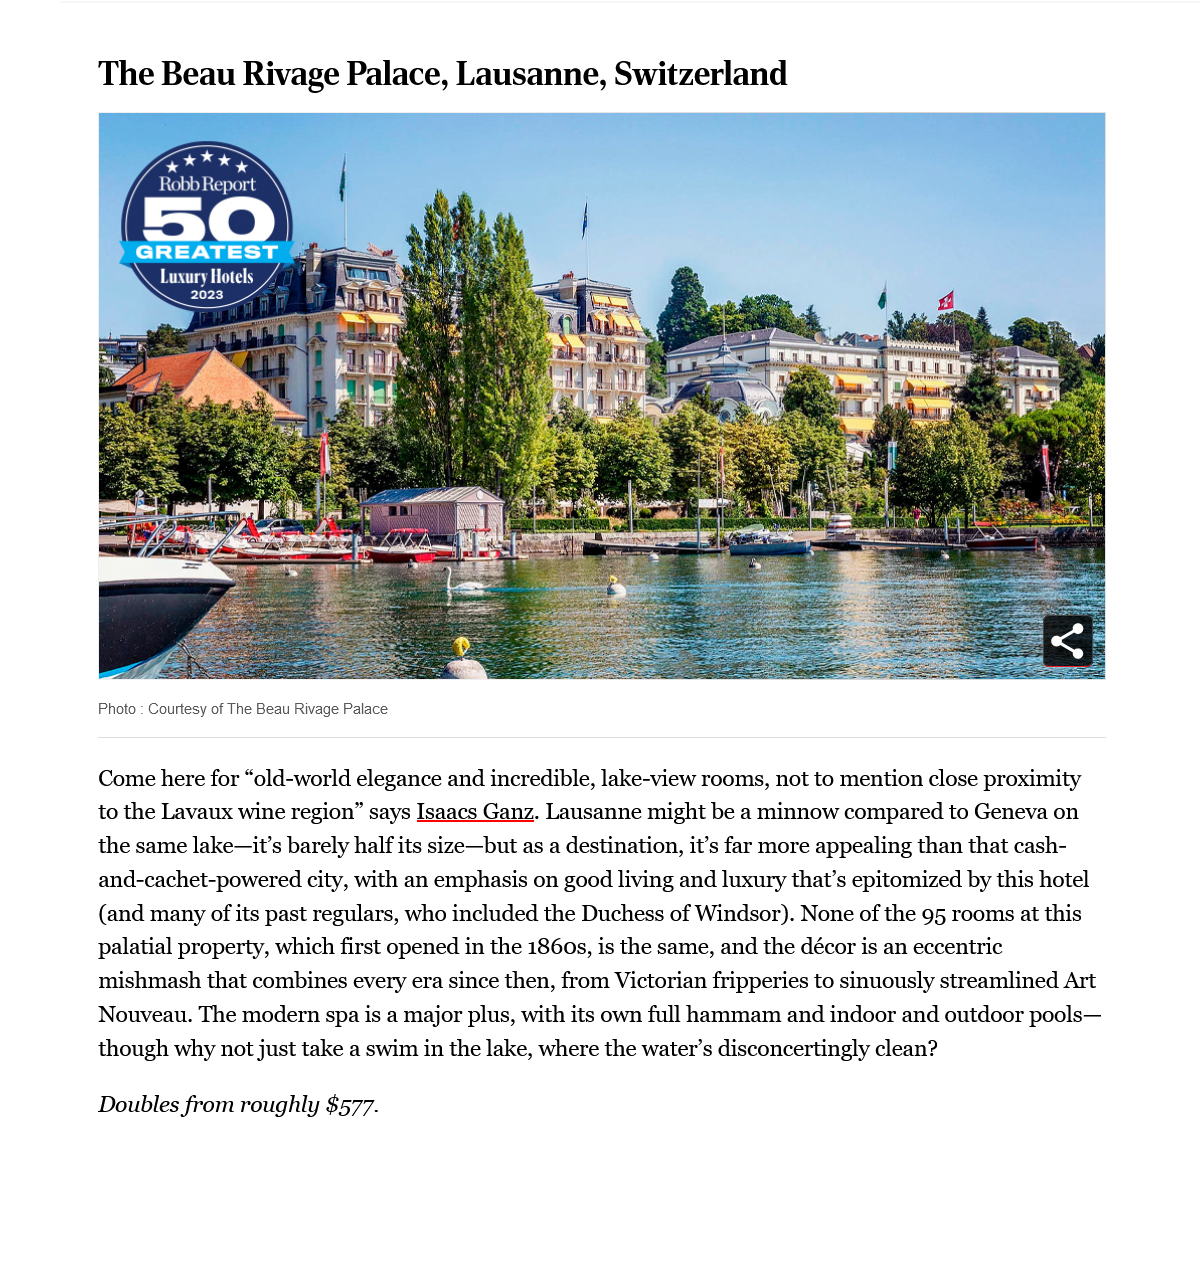 Robb Report 50 Best Luxury Hotels Beau-Rivage Palace